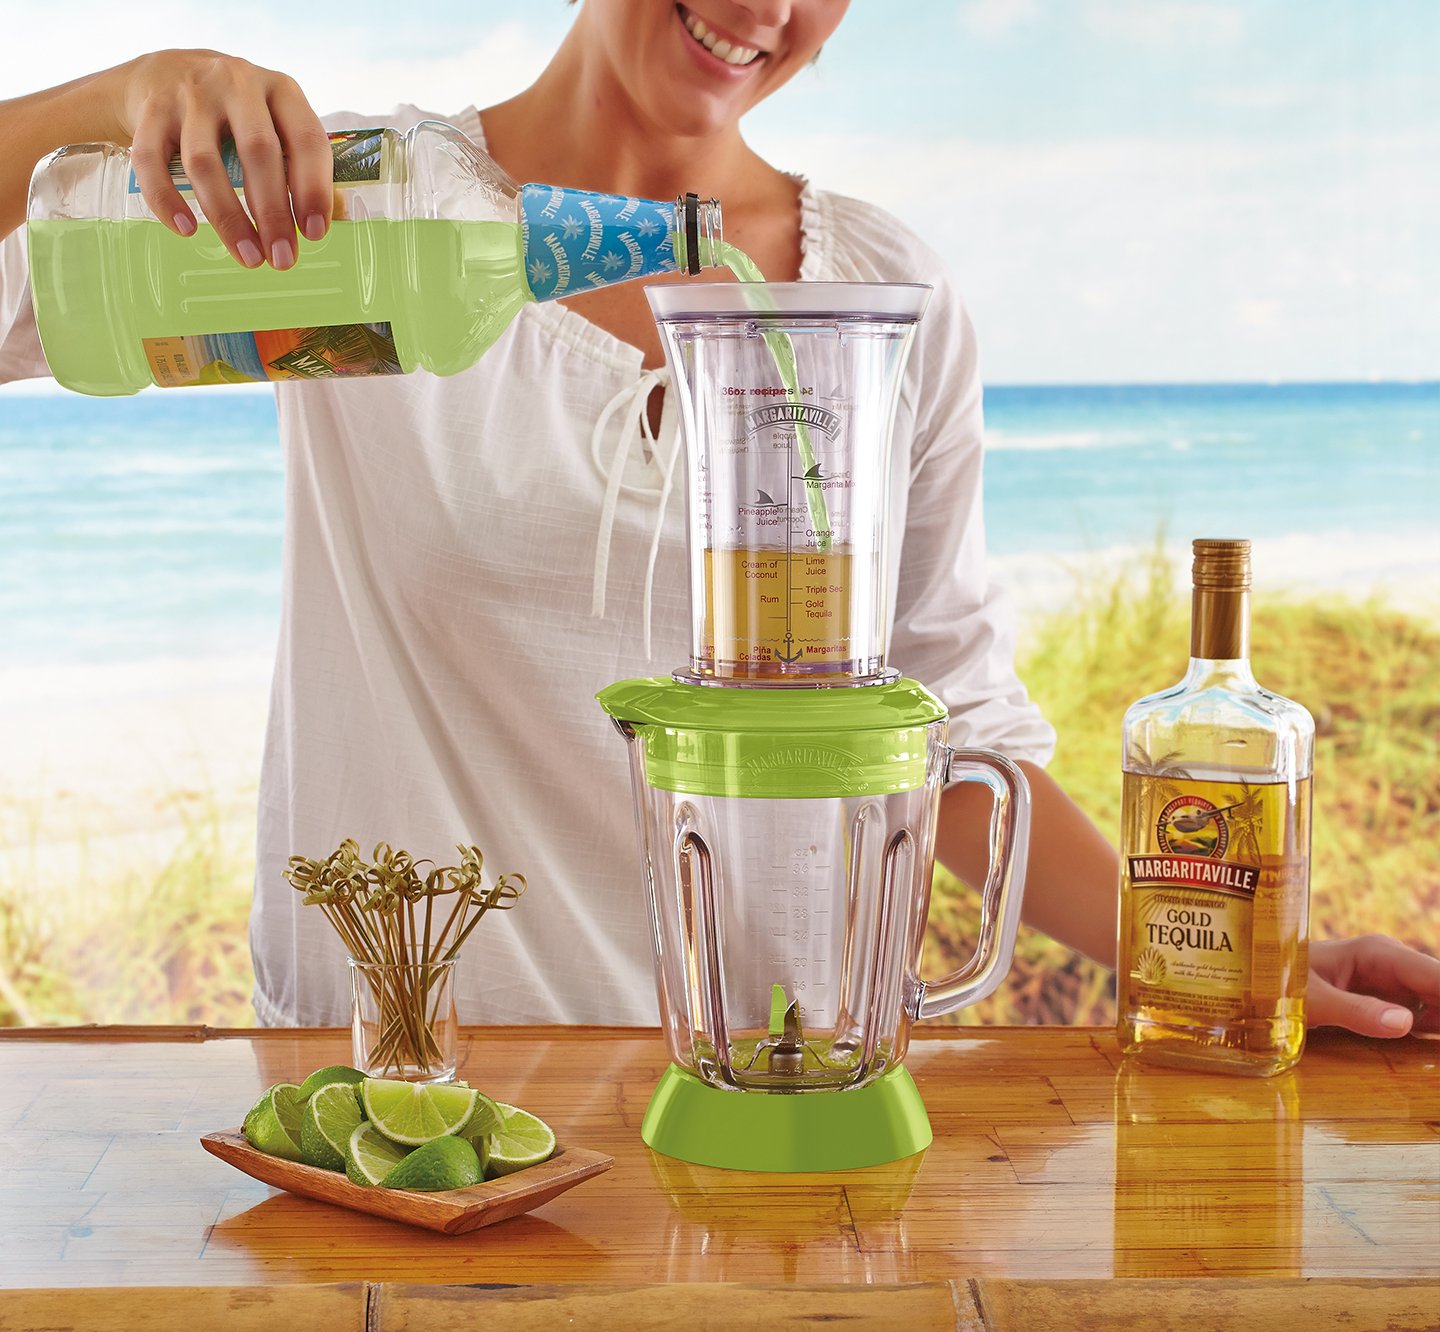 Margaritaville mixed drink maker  Mixed drinks, Drinks, Alcoholic drinks